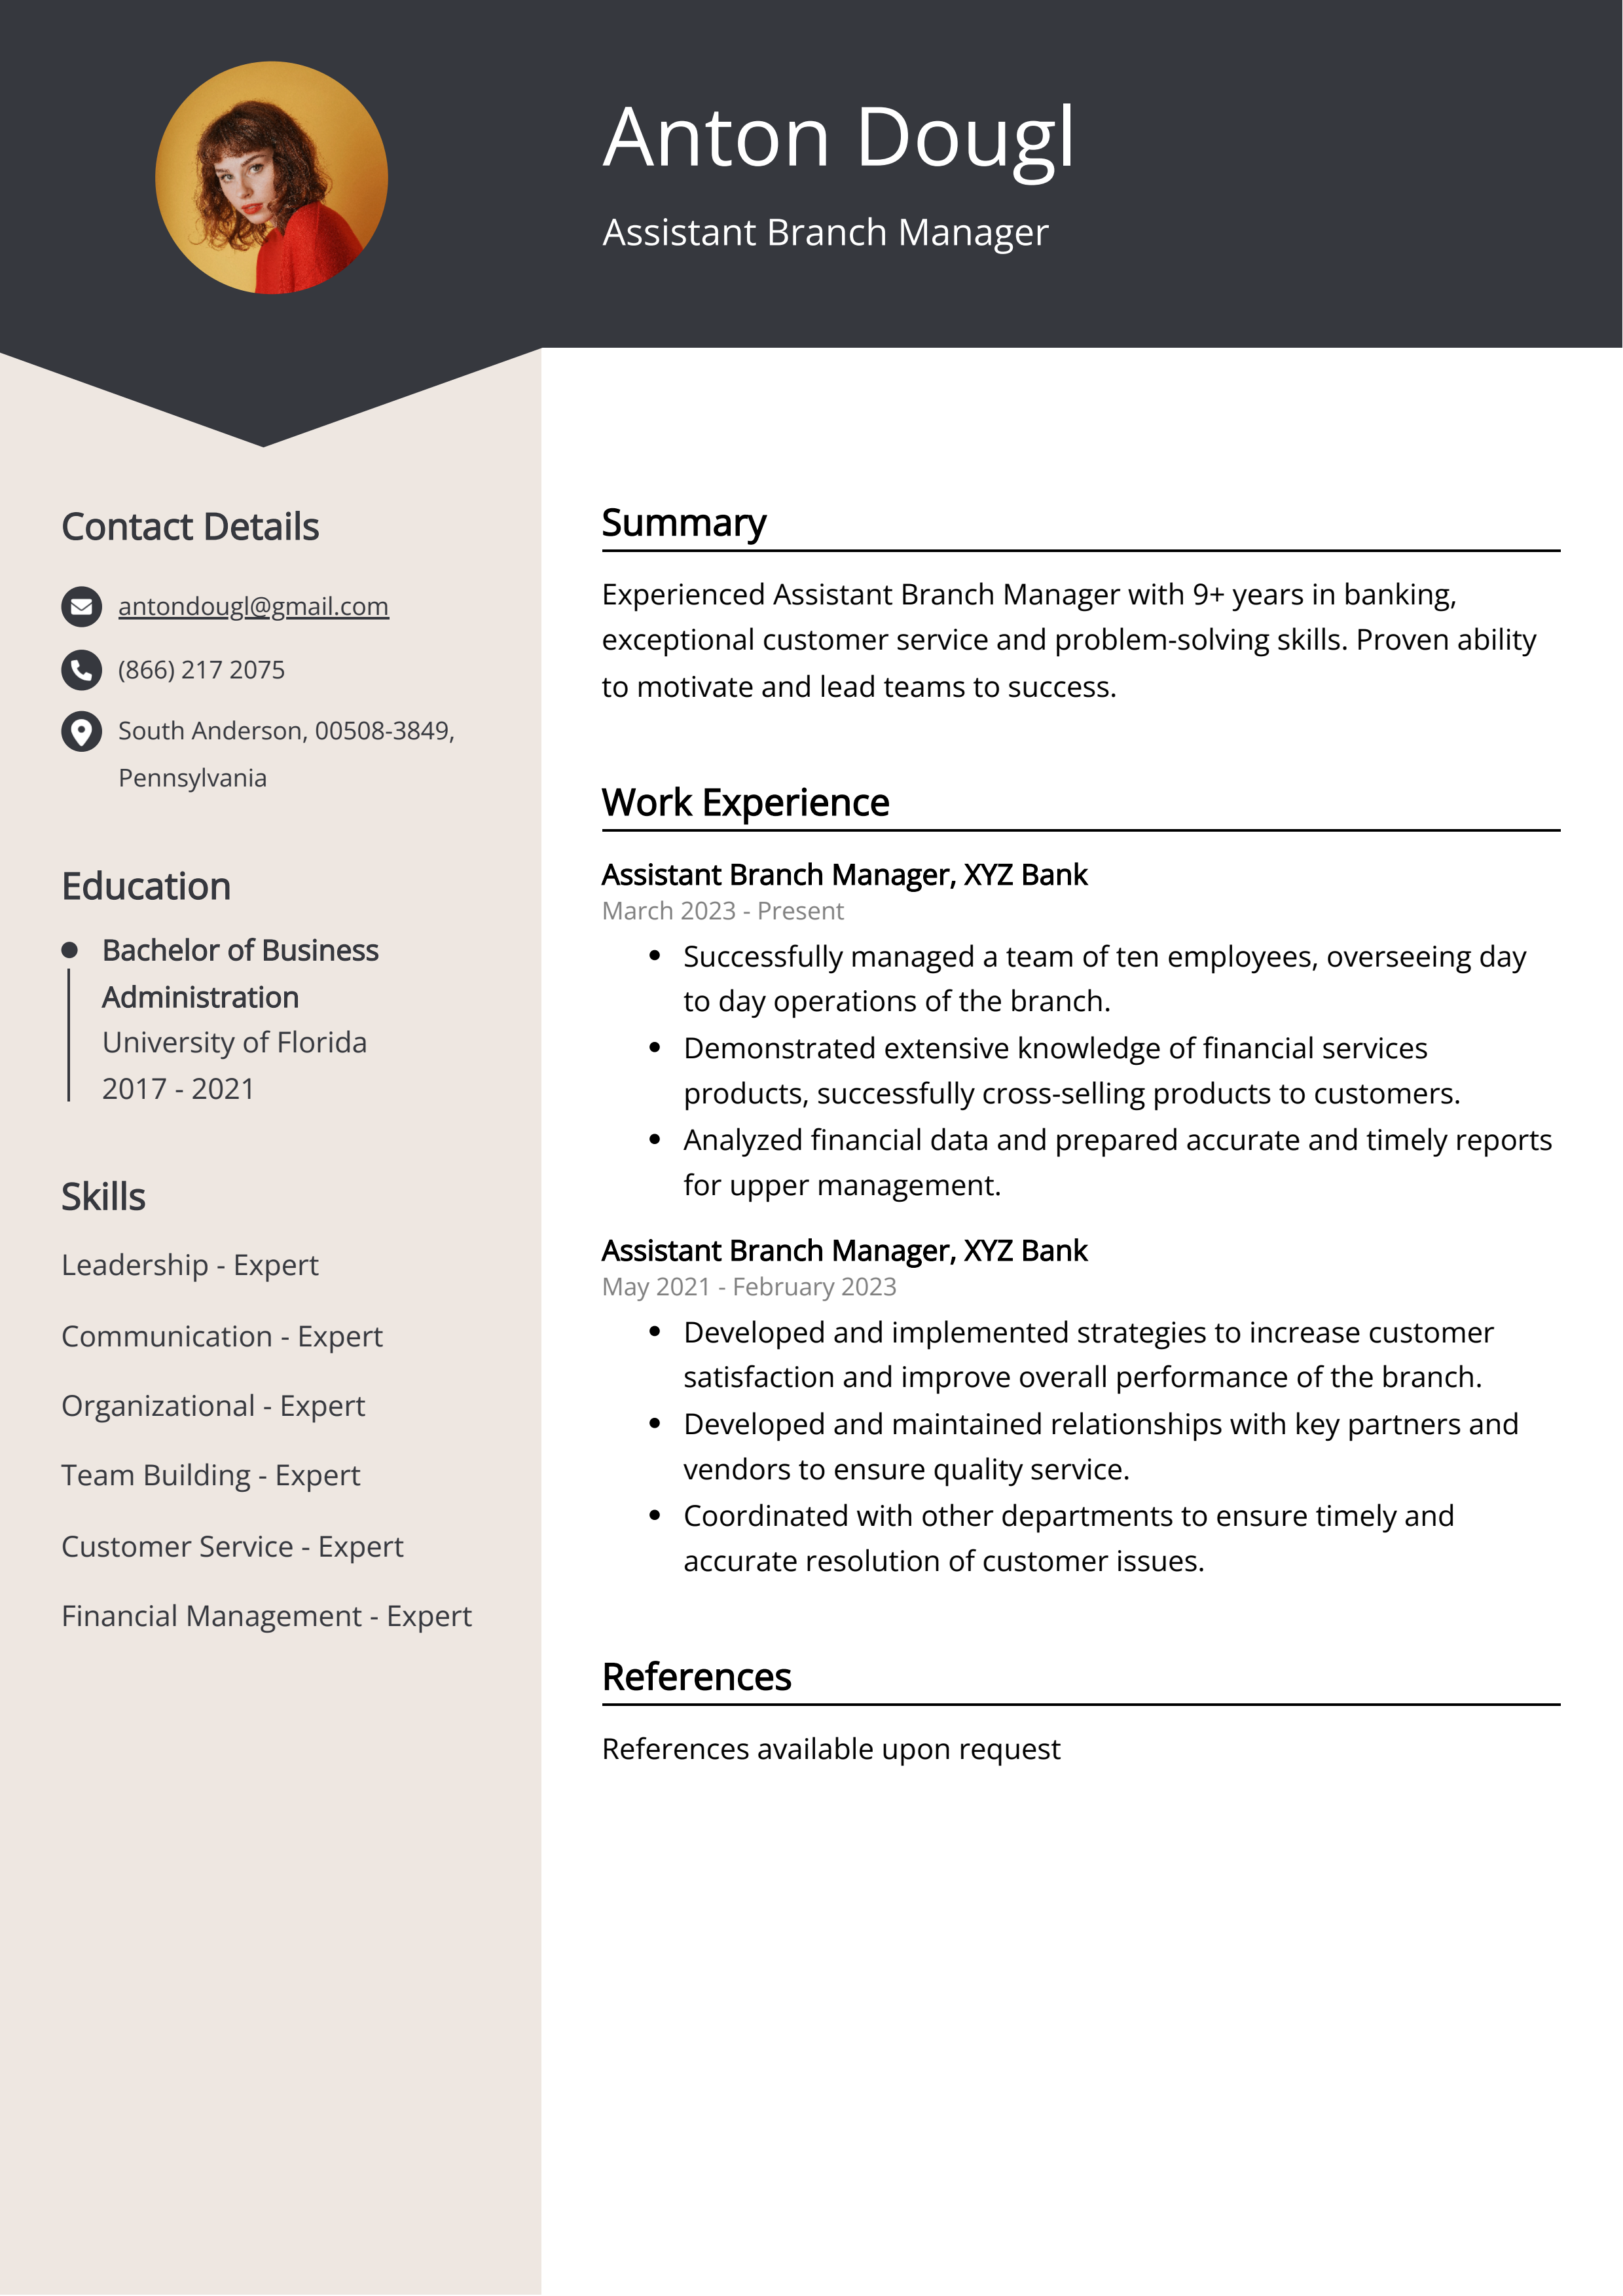 Assistant Branch Manager CV Example